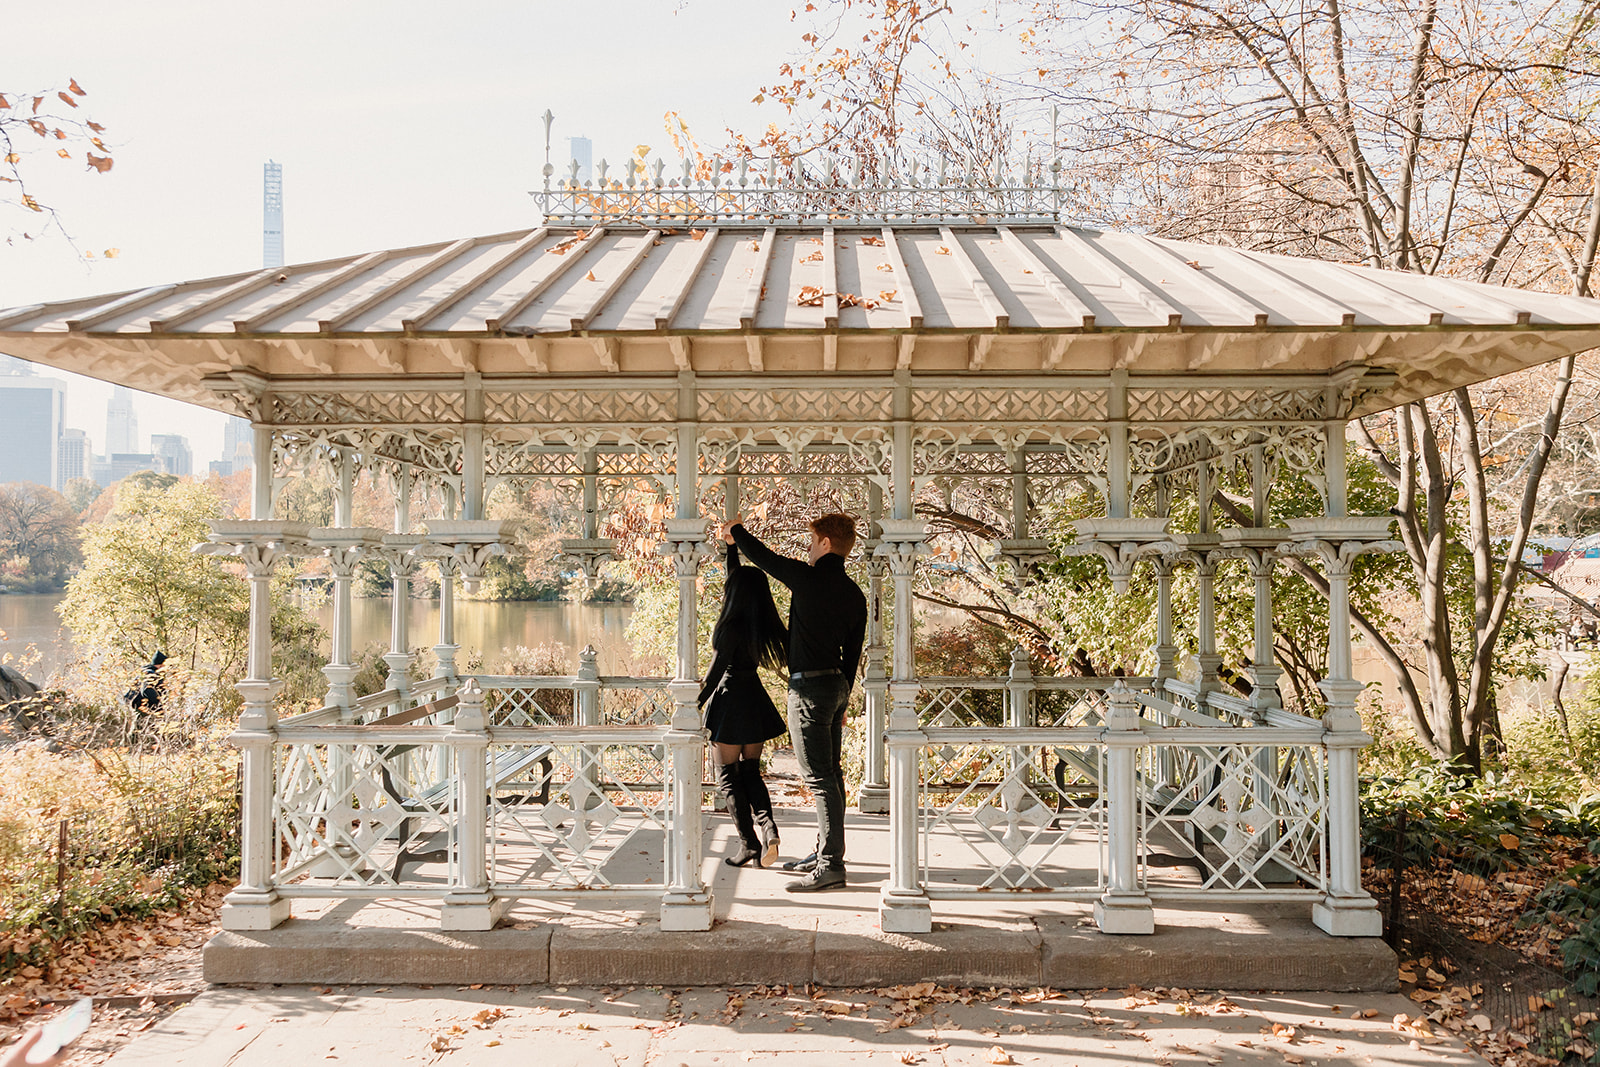 Couple New York engagement photos in Central Park